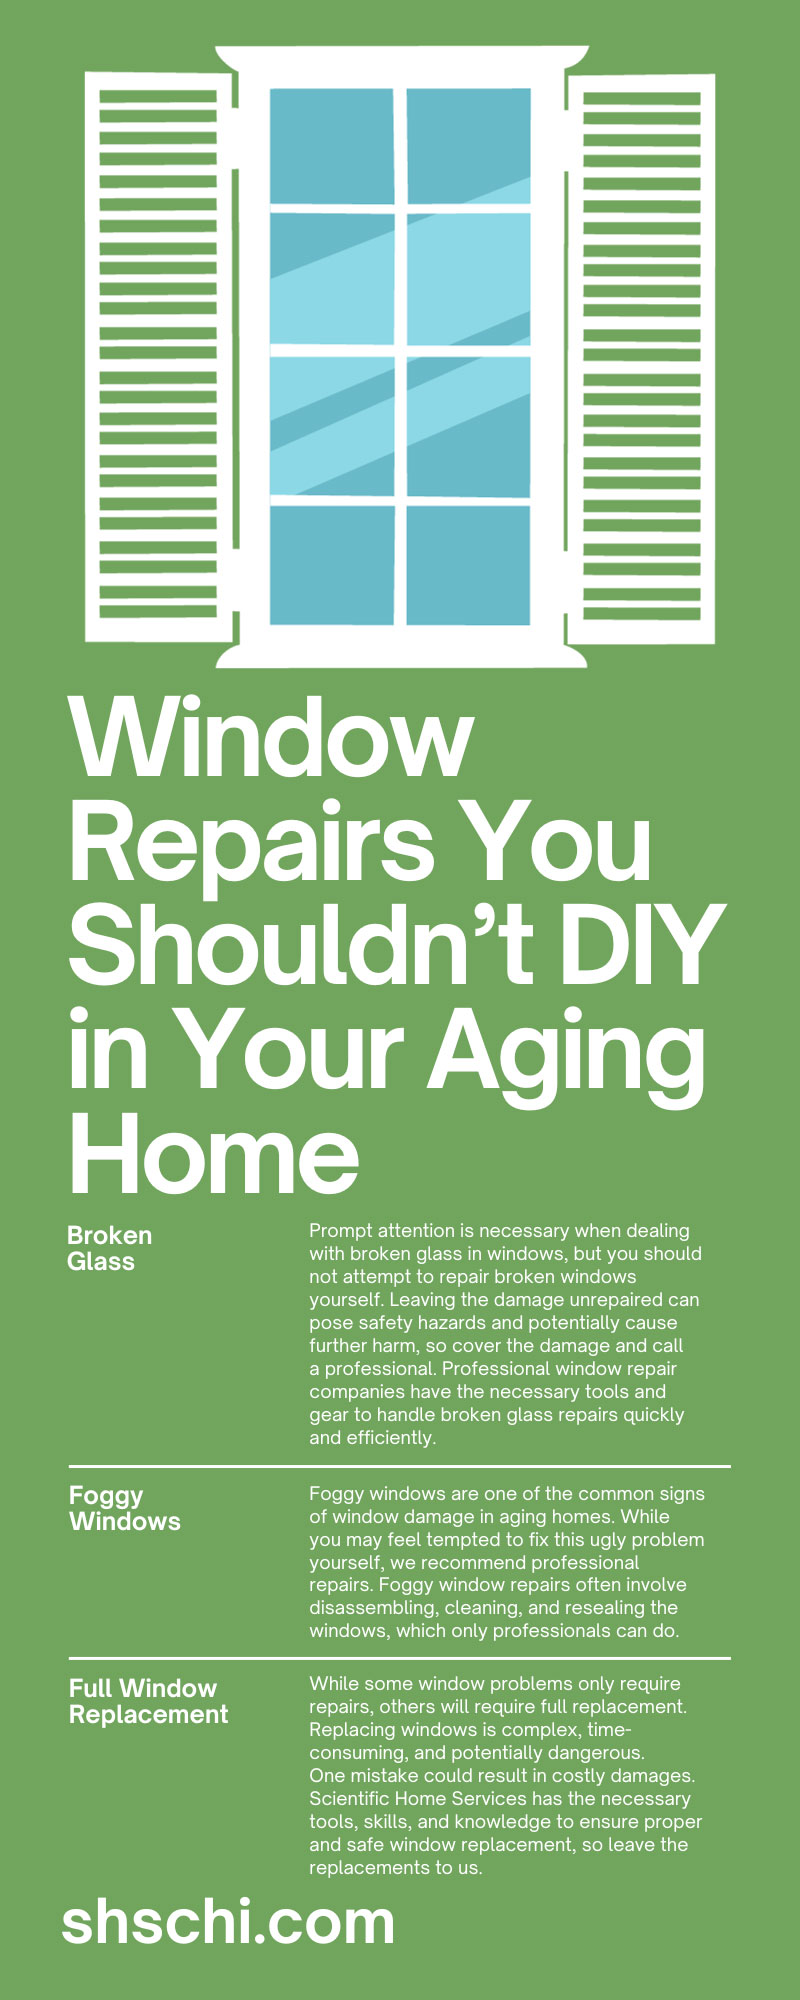 Window Repairs You Shouldn’t DIY in Your Aging Home